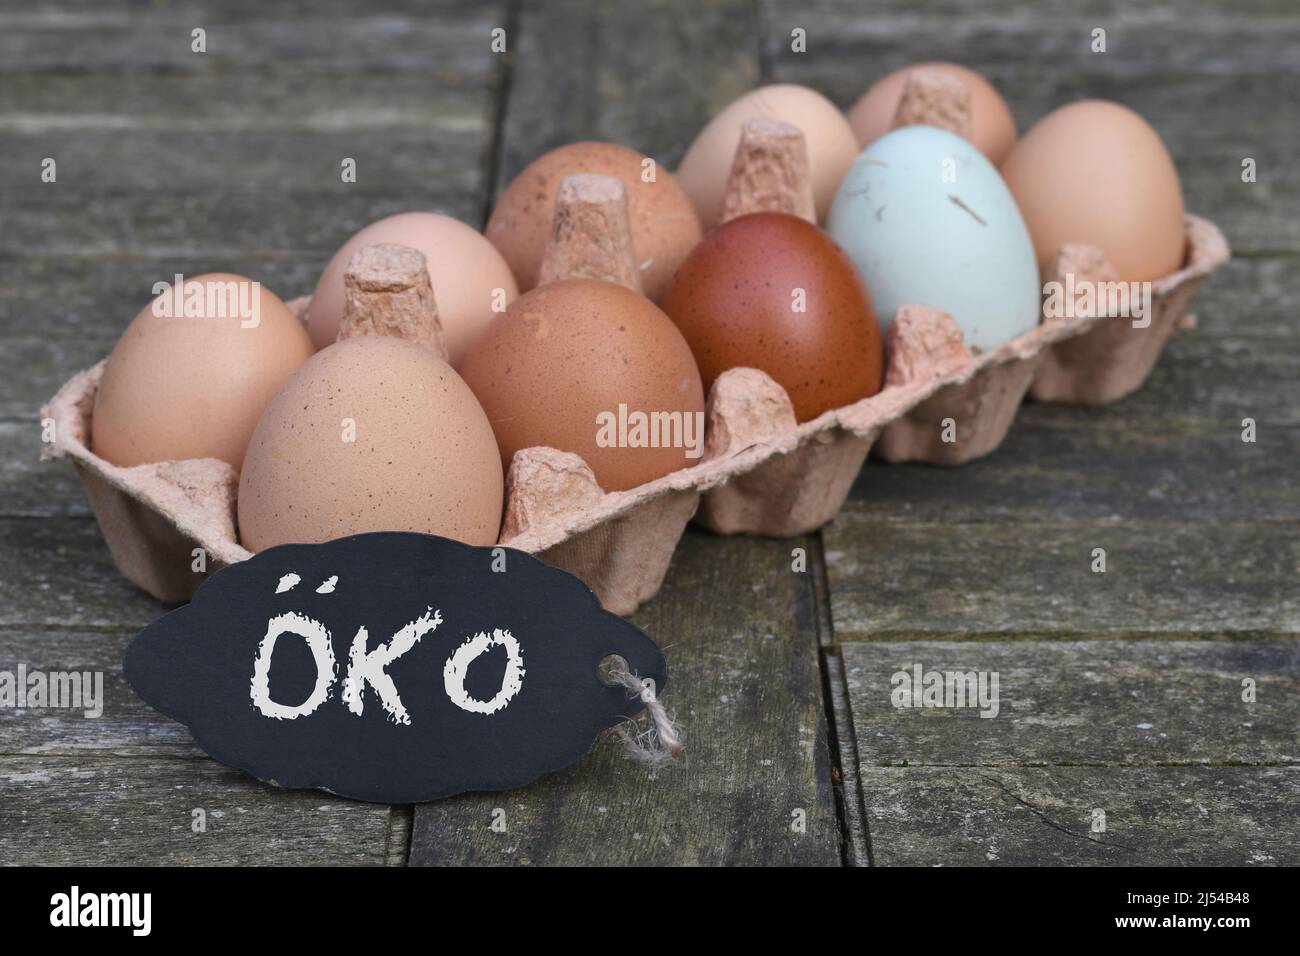 chalkboard with the inscription 'OEKO' in front of chicken eggs in the egg carton, Germany Stock Photo